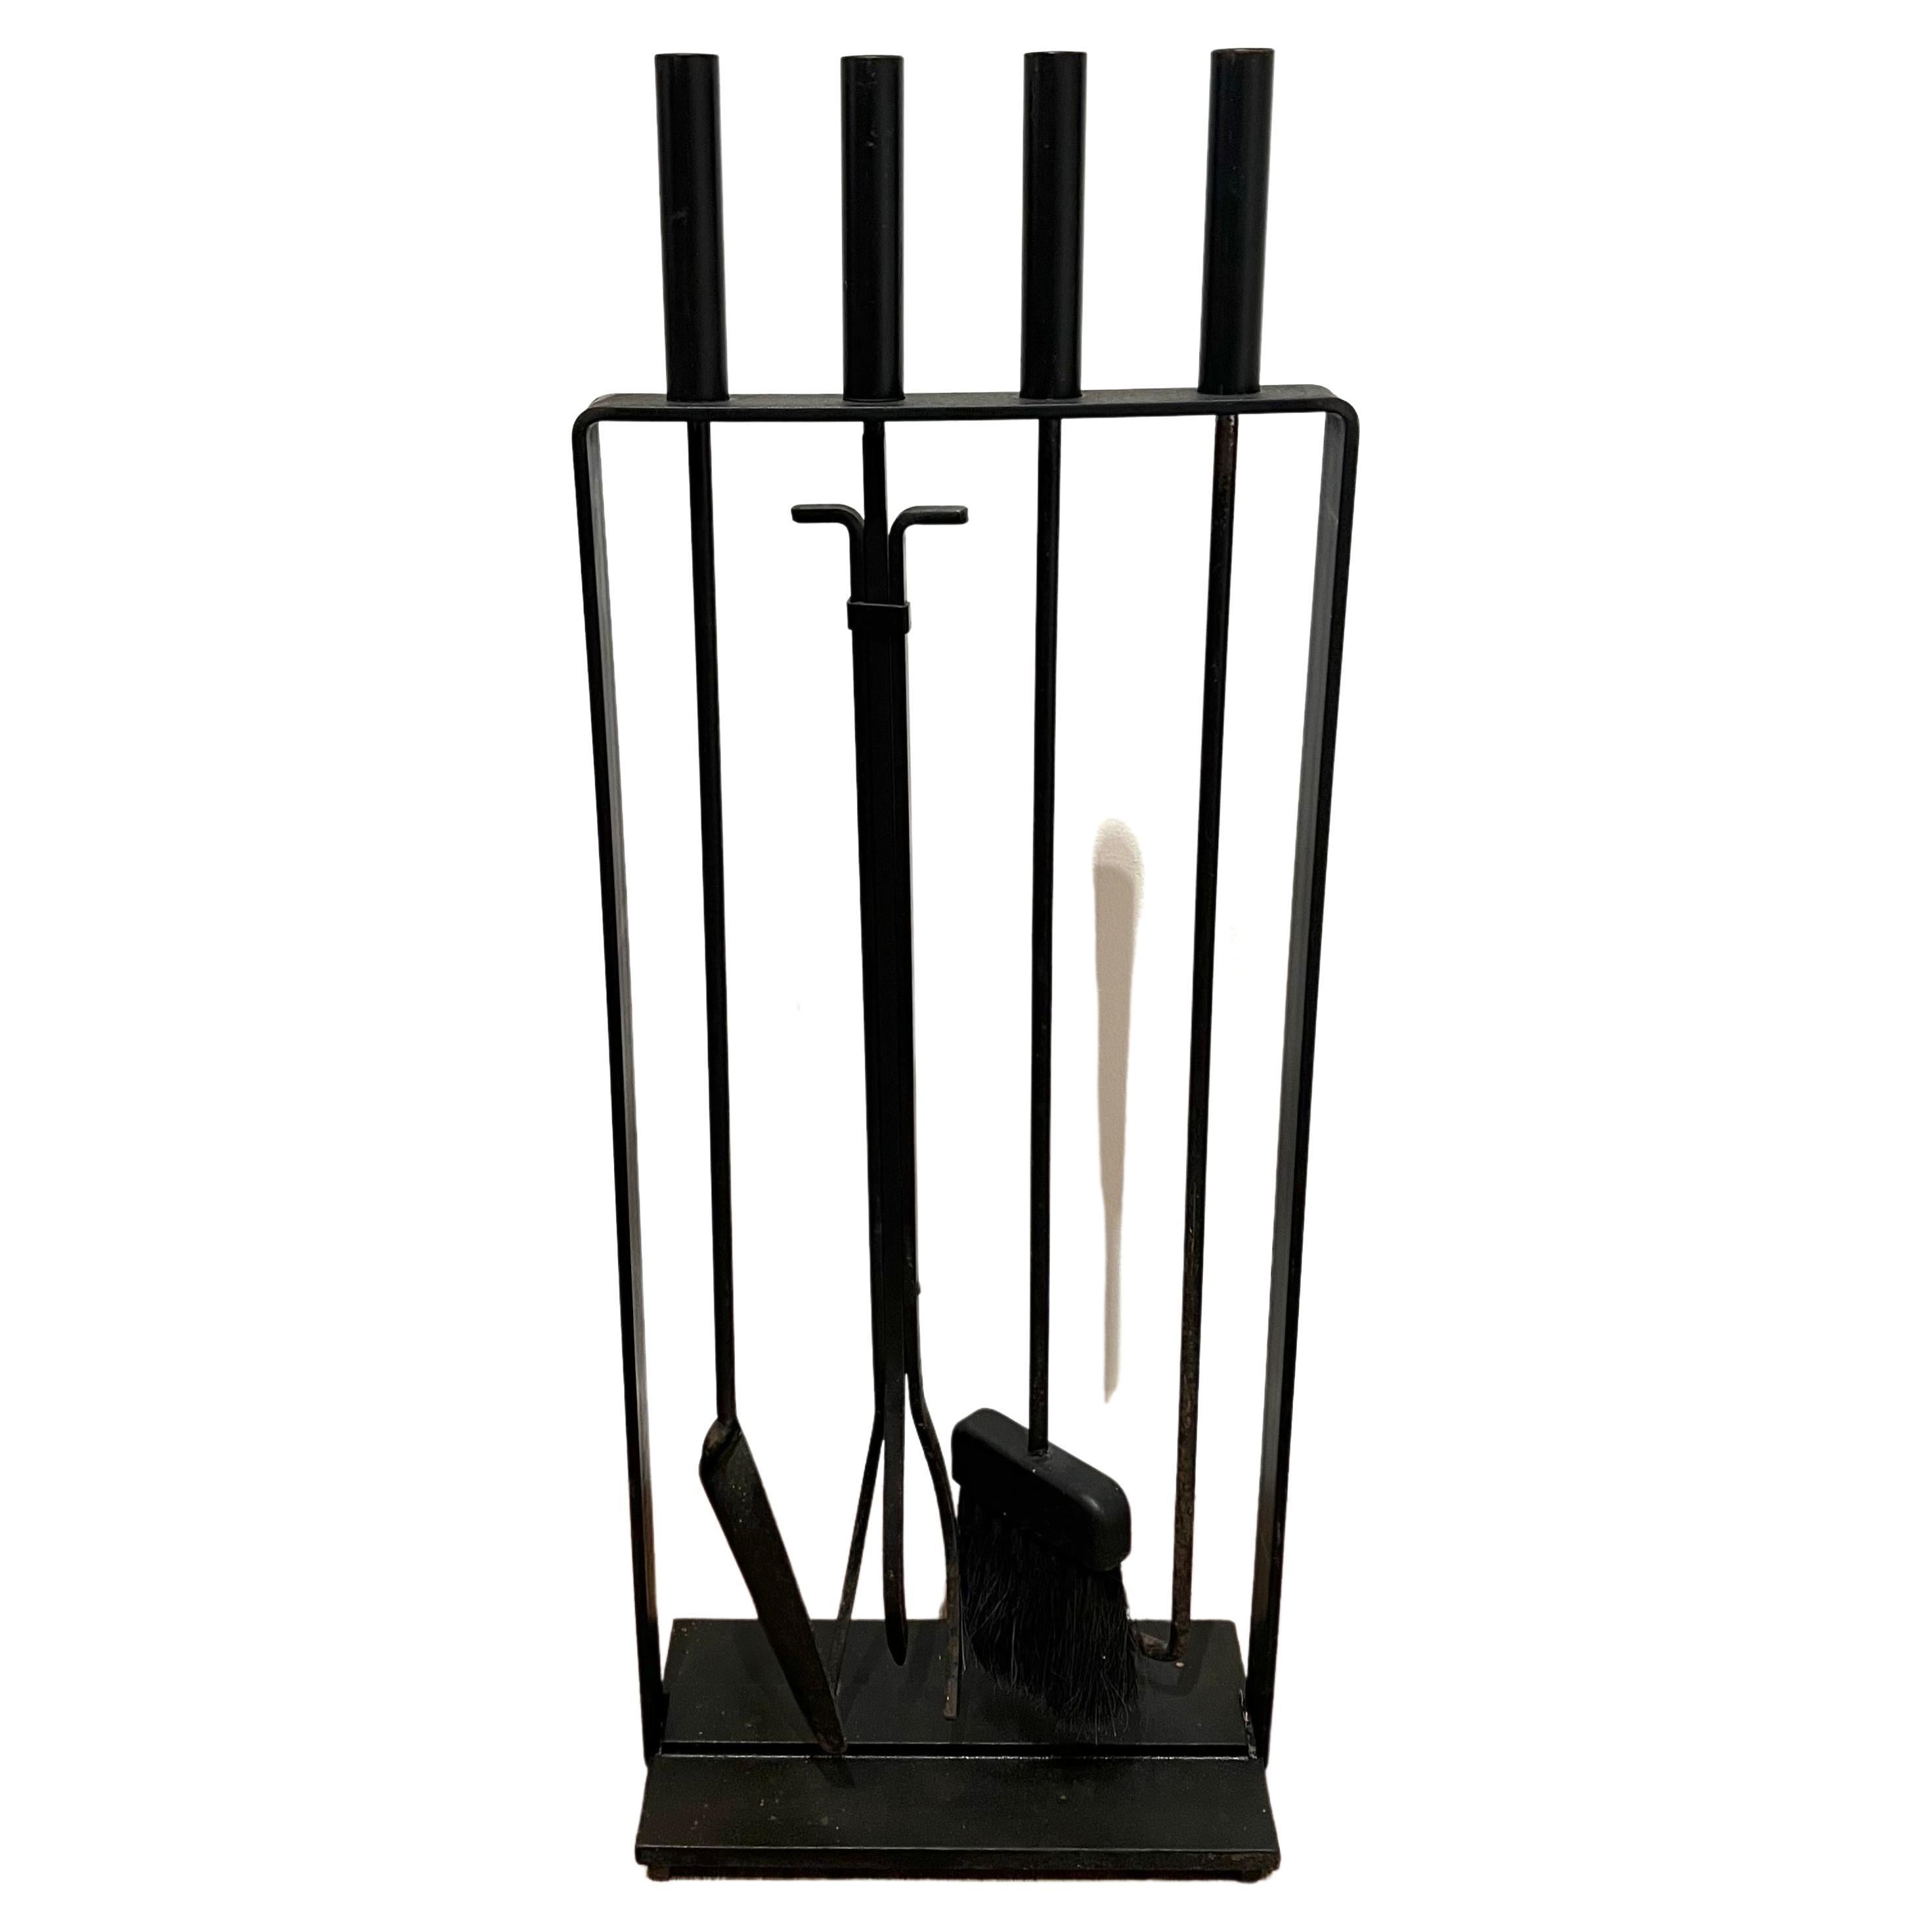 Solid iron fire tools set in black enameled finish with a nice patina in original condition. can be used indoors or outdoors.